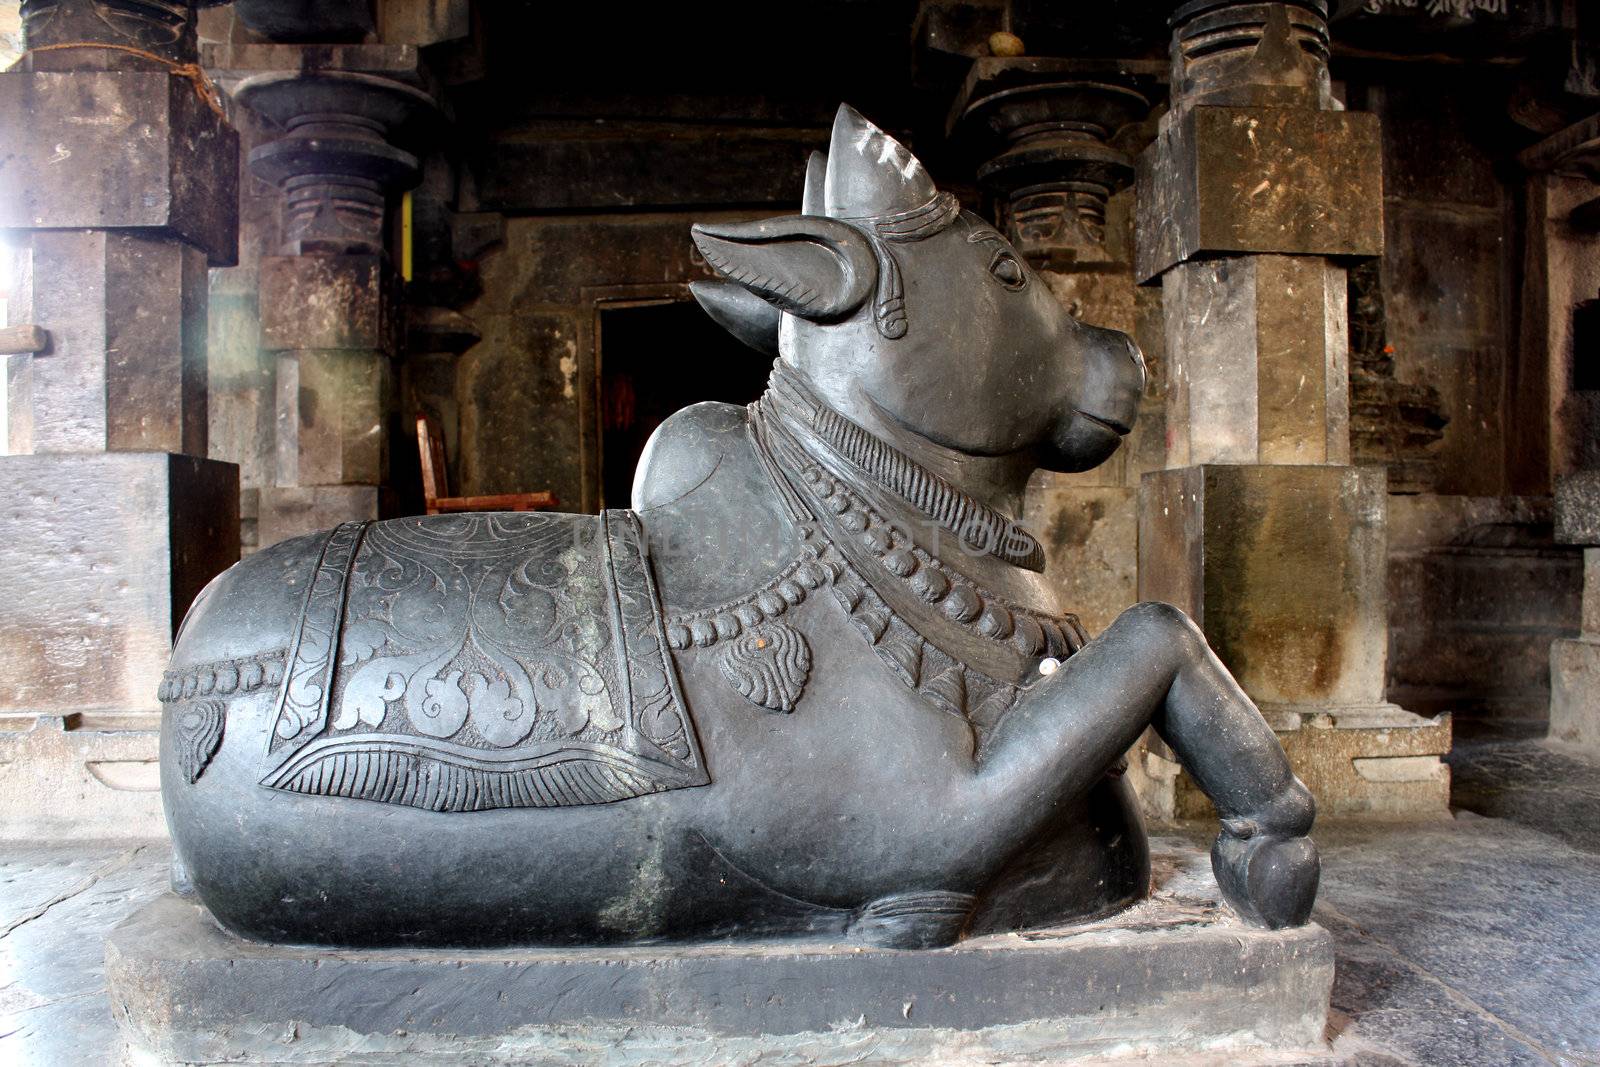 A beautiful sculpture of the Nandi - The Bull(considered to be vehicle of lord Shiva), in an ancient Indian temple.